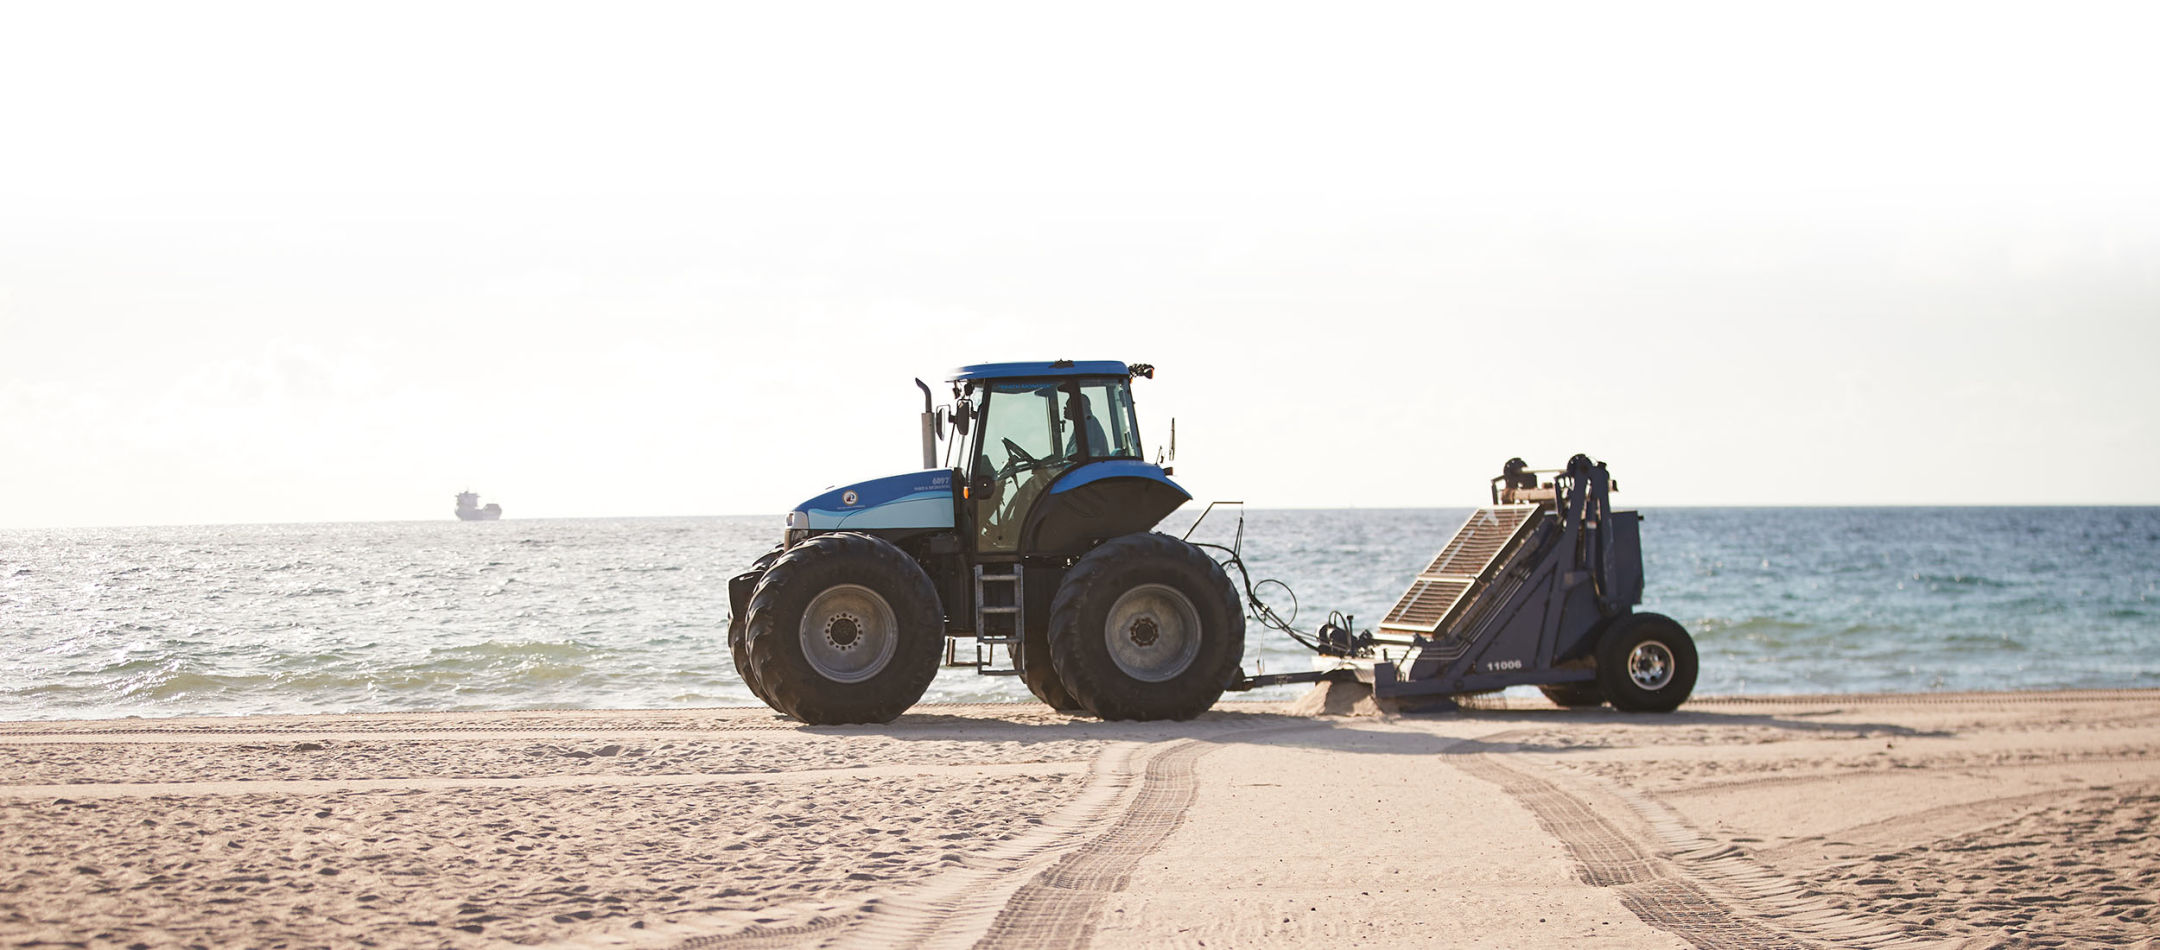 Fort Lauderdale Beach Tractor